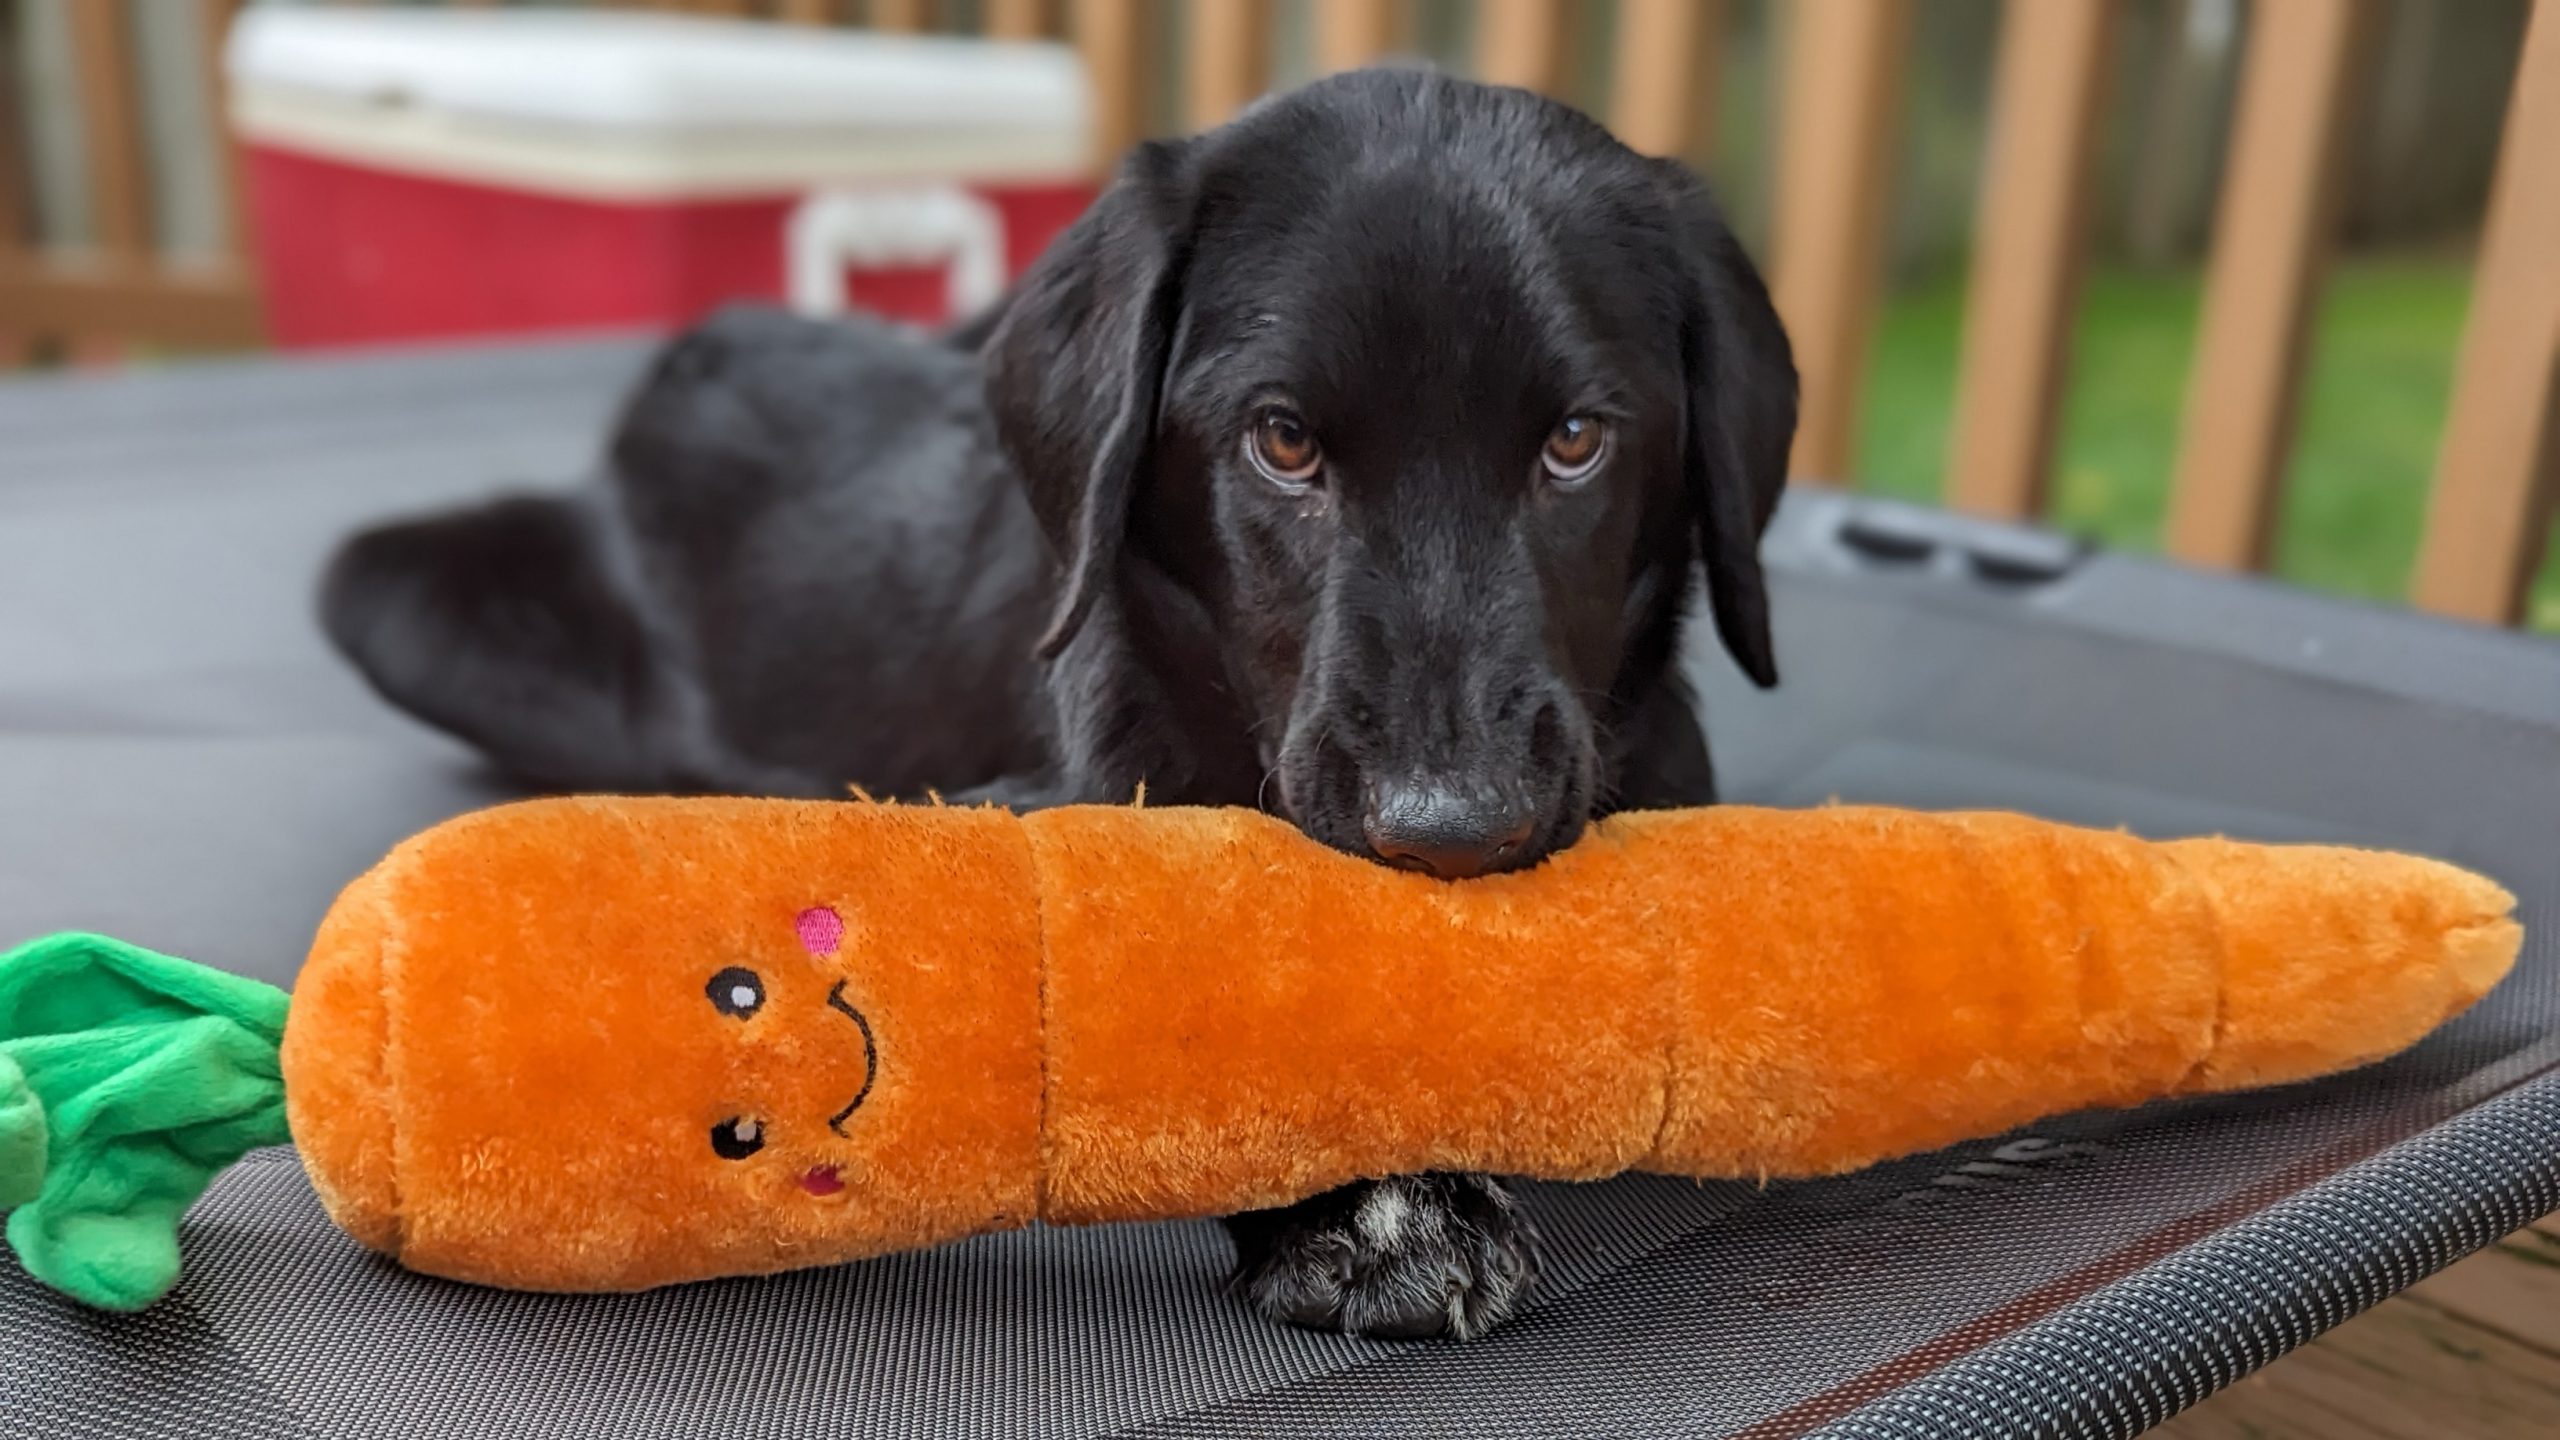 Black Labrador Retriever holding a carrot dog toy in his mouth.